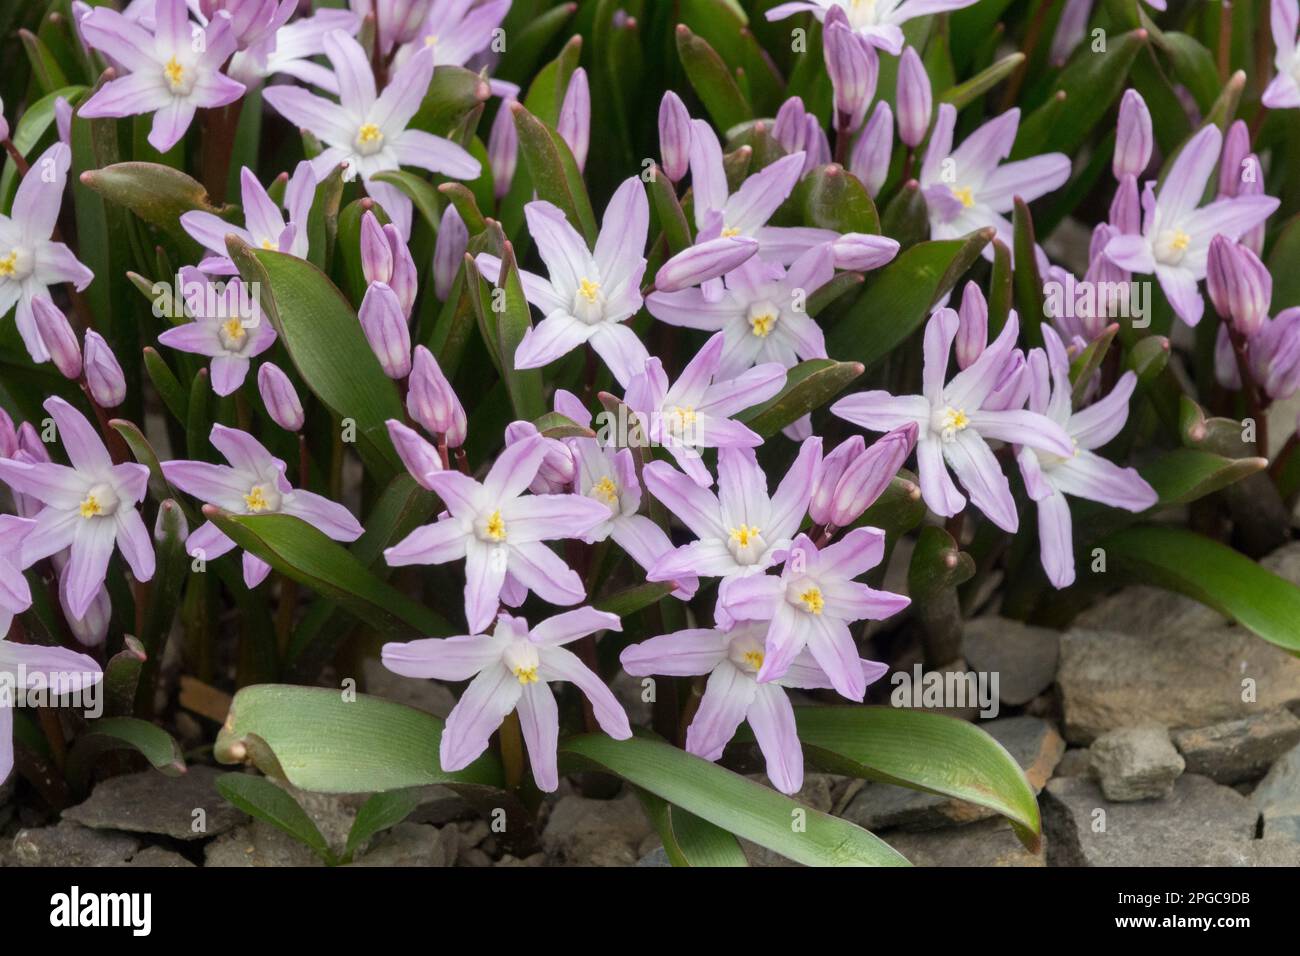 Glory-of-the-Snow, Scilla forbesii „Pink Giant“, Frühling, Felsen, Garten, Hardy, Perennial, Low, Plant, Scilla „Pink Giant“ Stockfoto